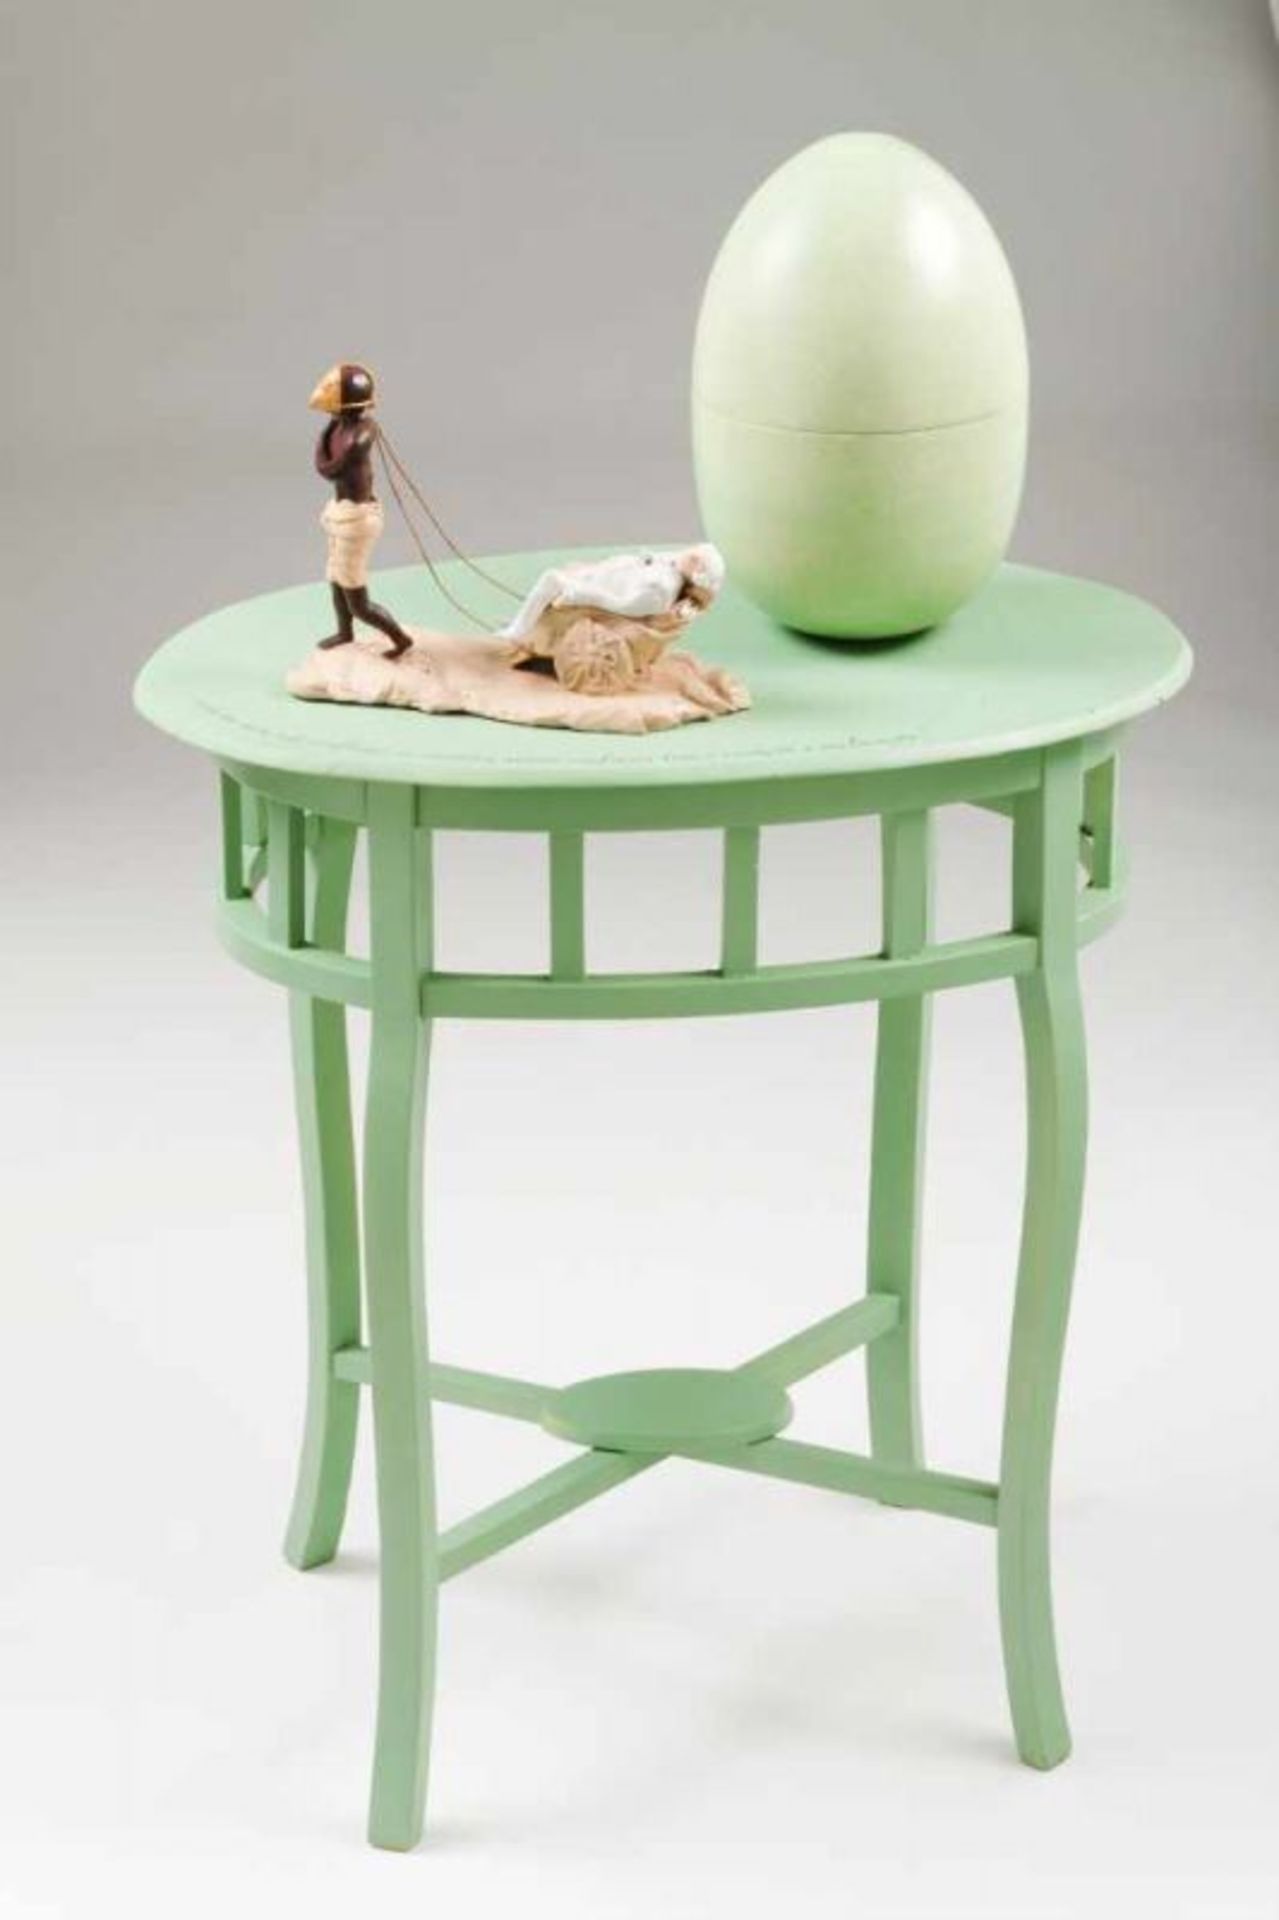 Vasco Araújo (n. 1975) Untitled From "Debret" series Sculpture with painted wood table and egg,